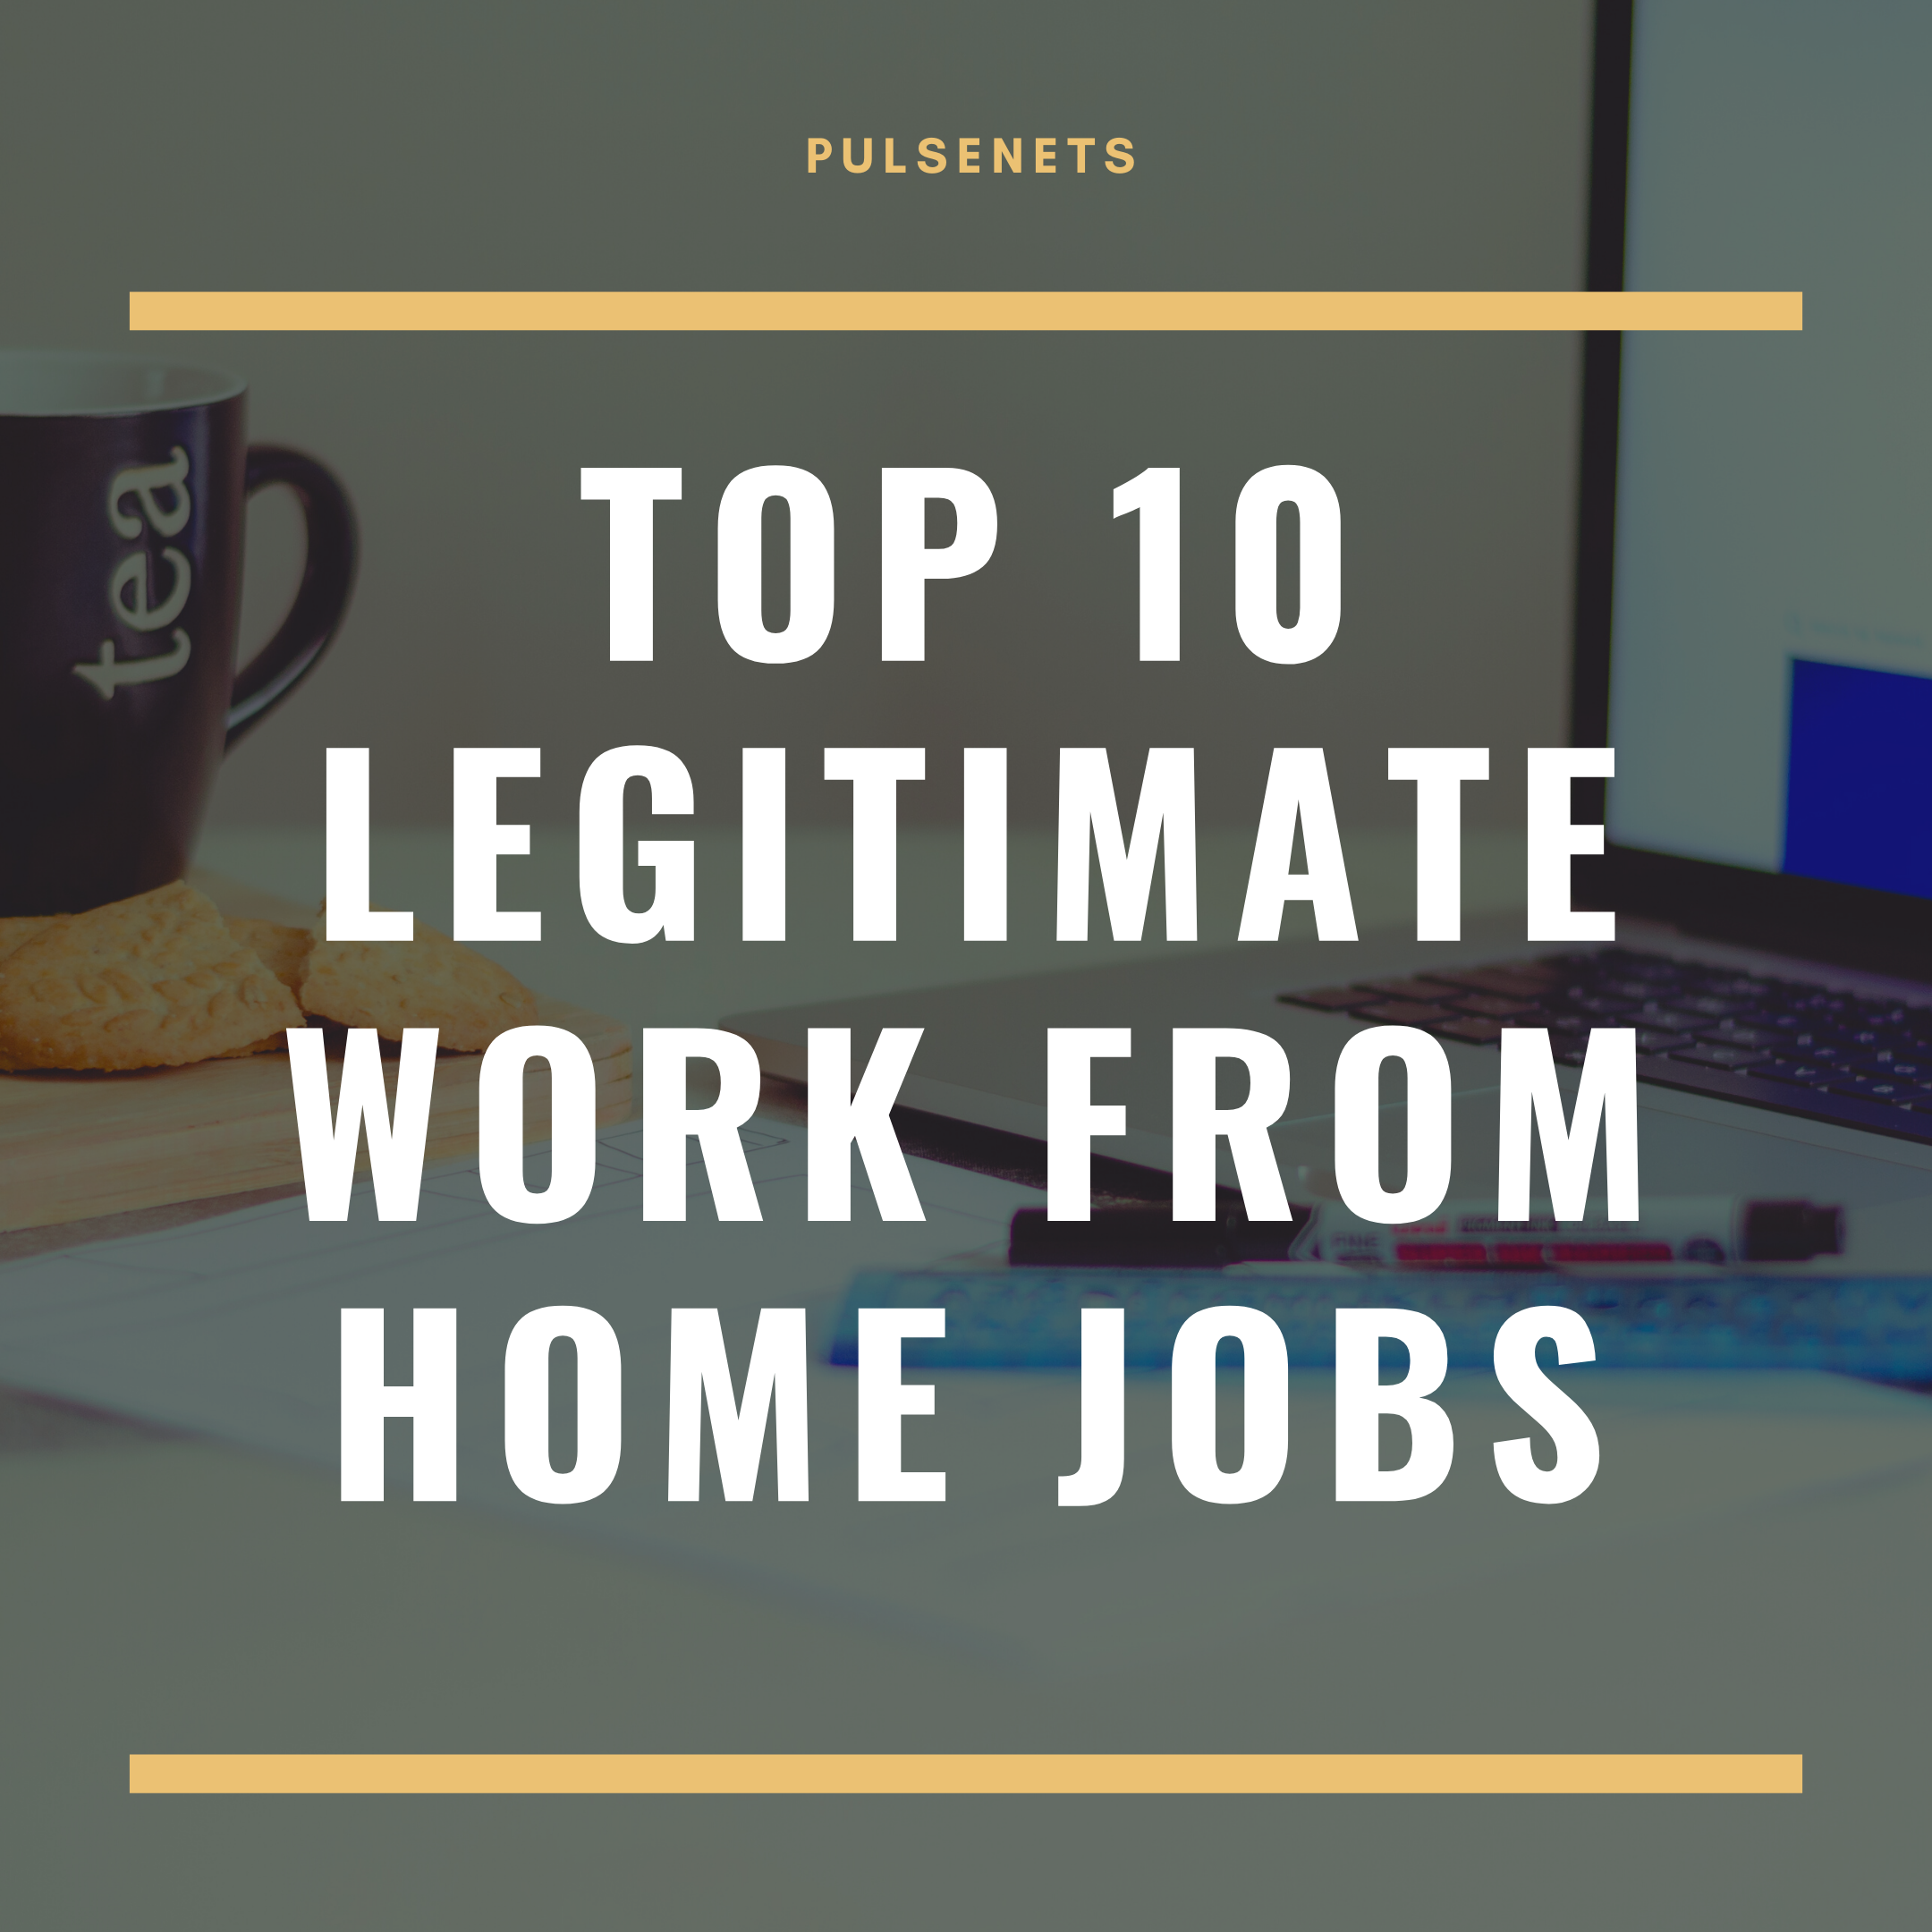 Top 10 Legitimate Work From Home Jobs Highly Informative Blog